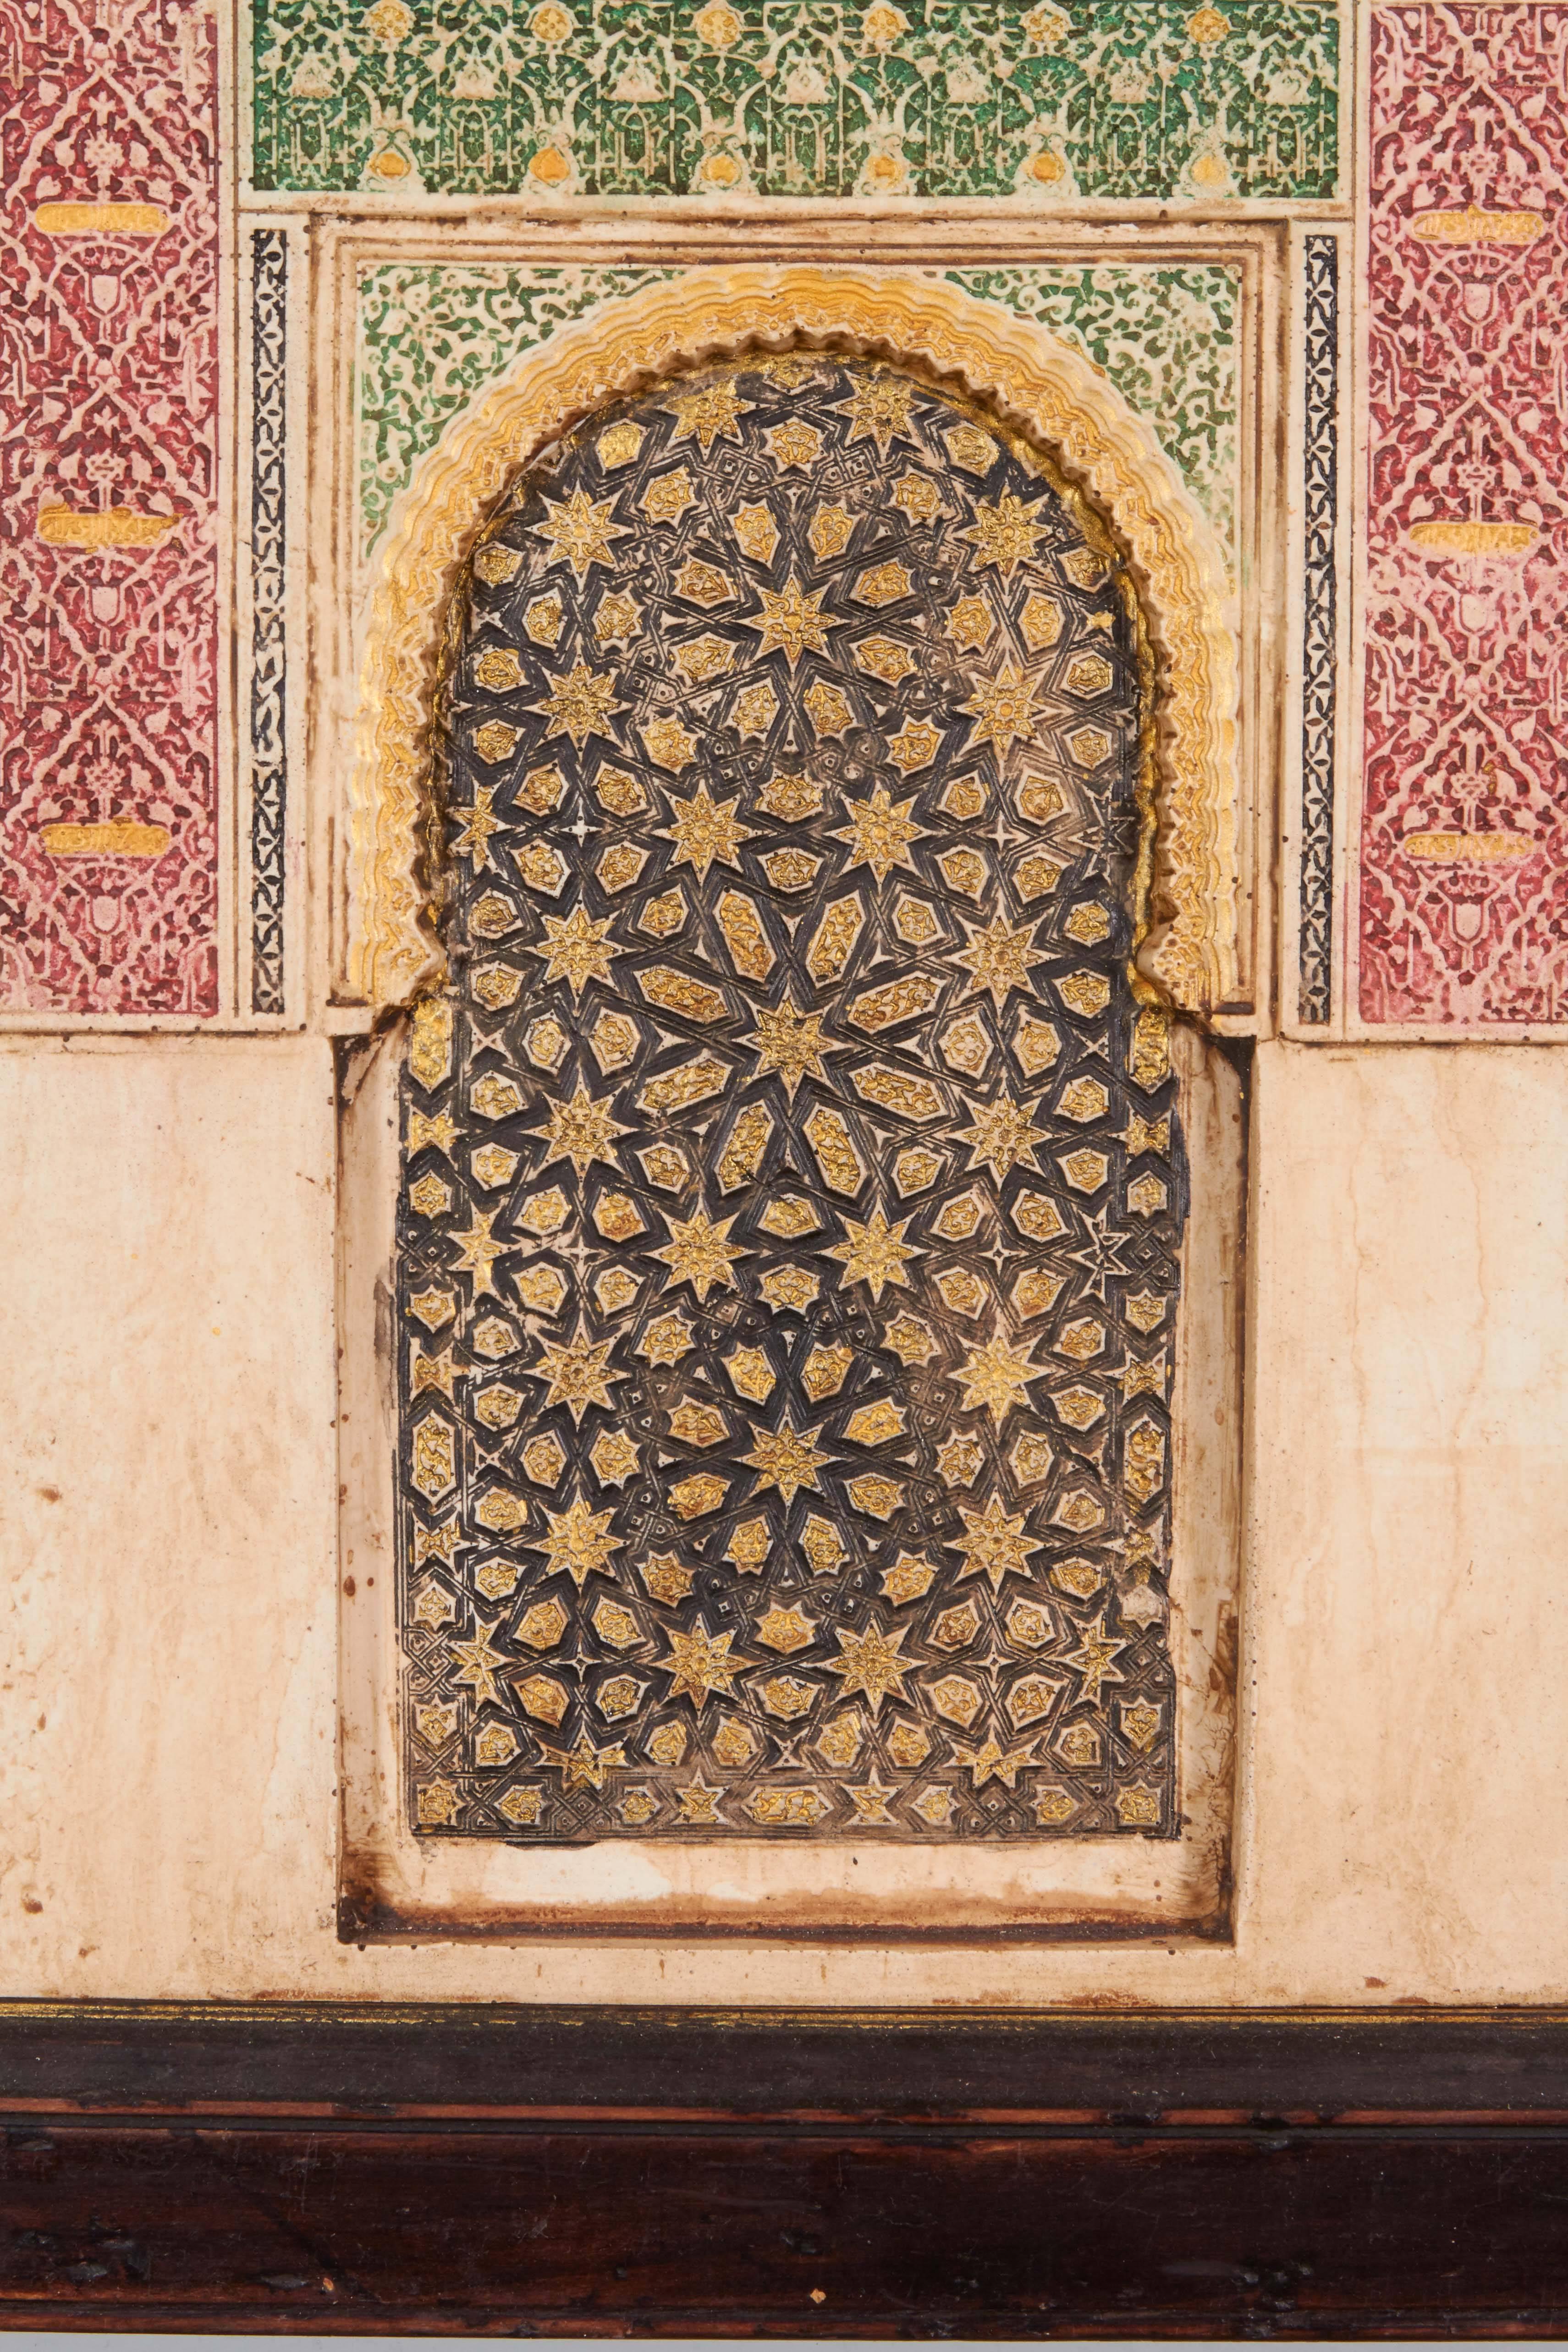 Very nice plaster wall plaque depicting the Alhambra in Spain, in the Islamic taste. Within original frame.

Attributed to Rafael Contreras.